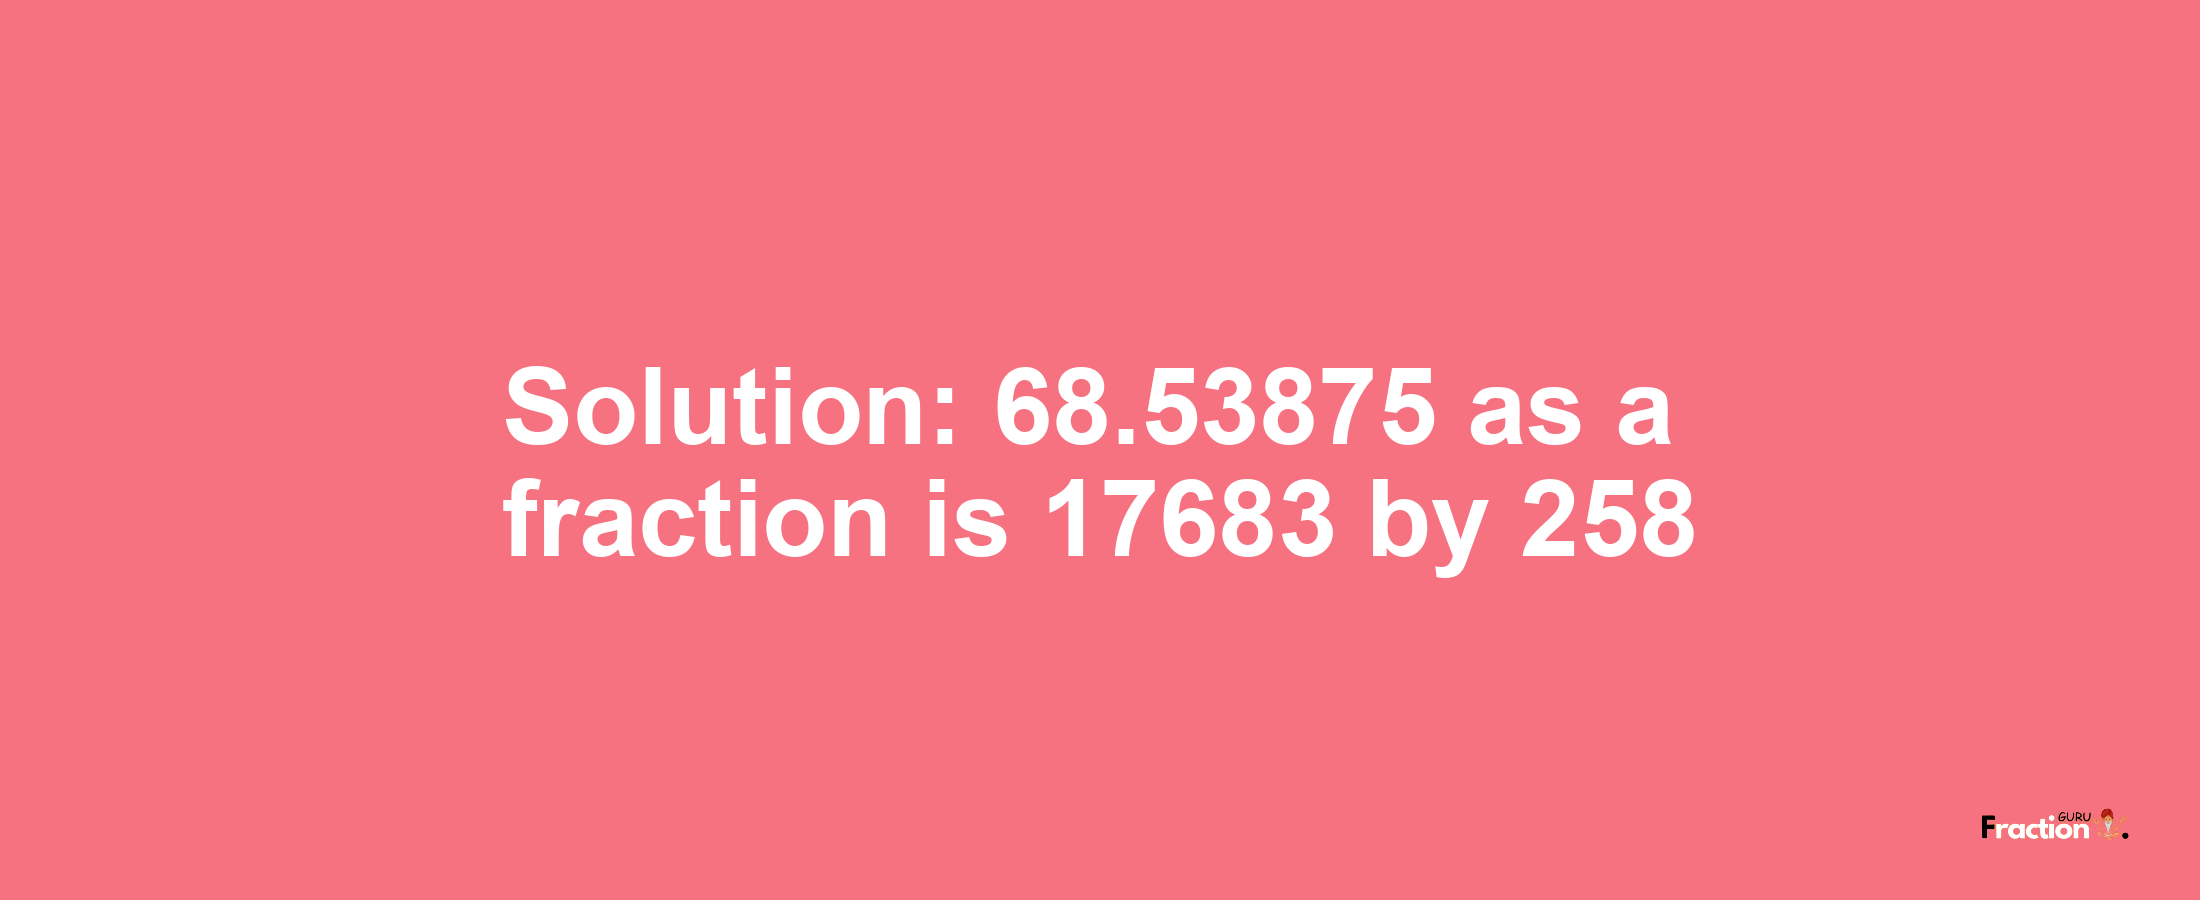 Solution:68.53875 as a fraction is 17683/258